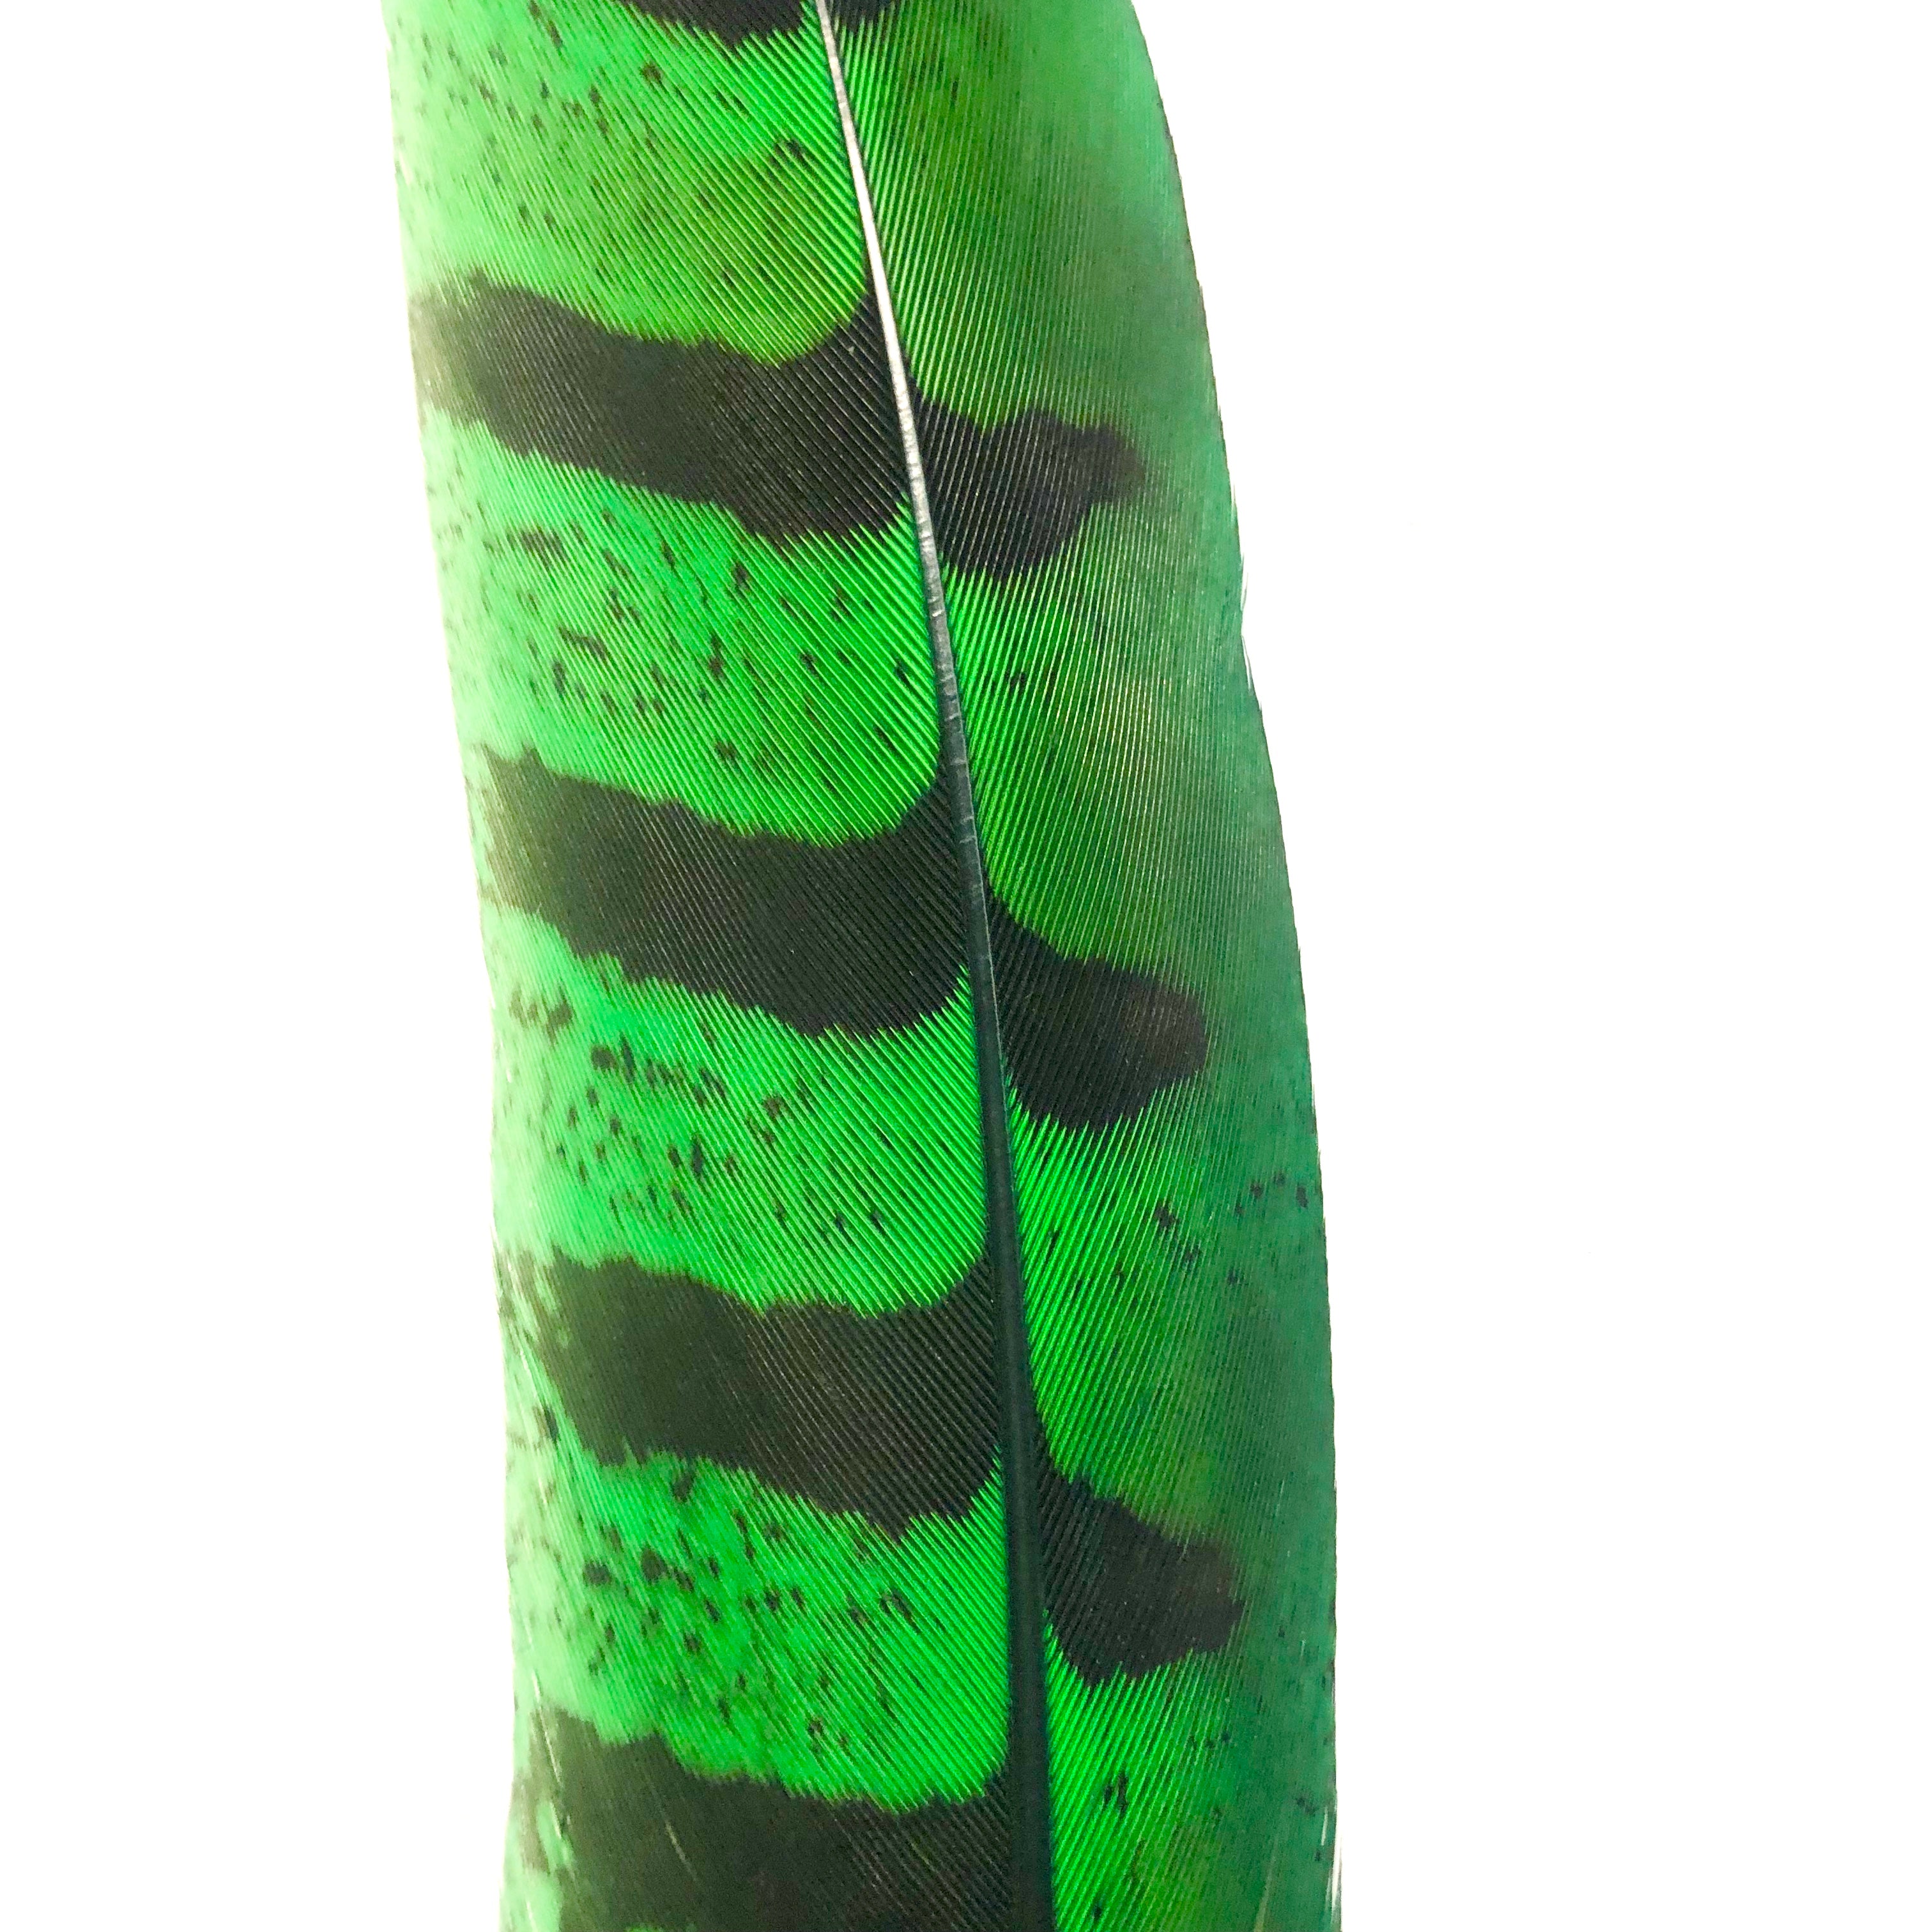 12" to 14" Reeves Pheasant Tail Feather - Green